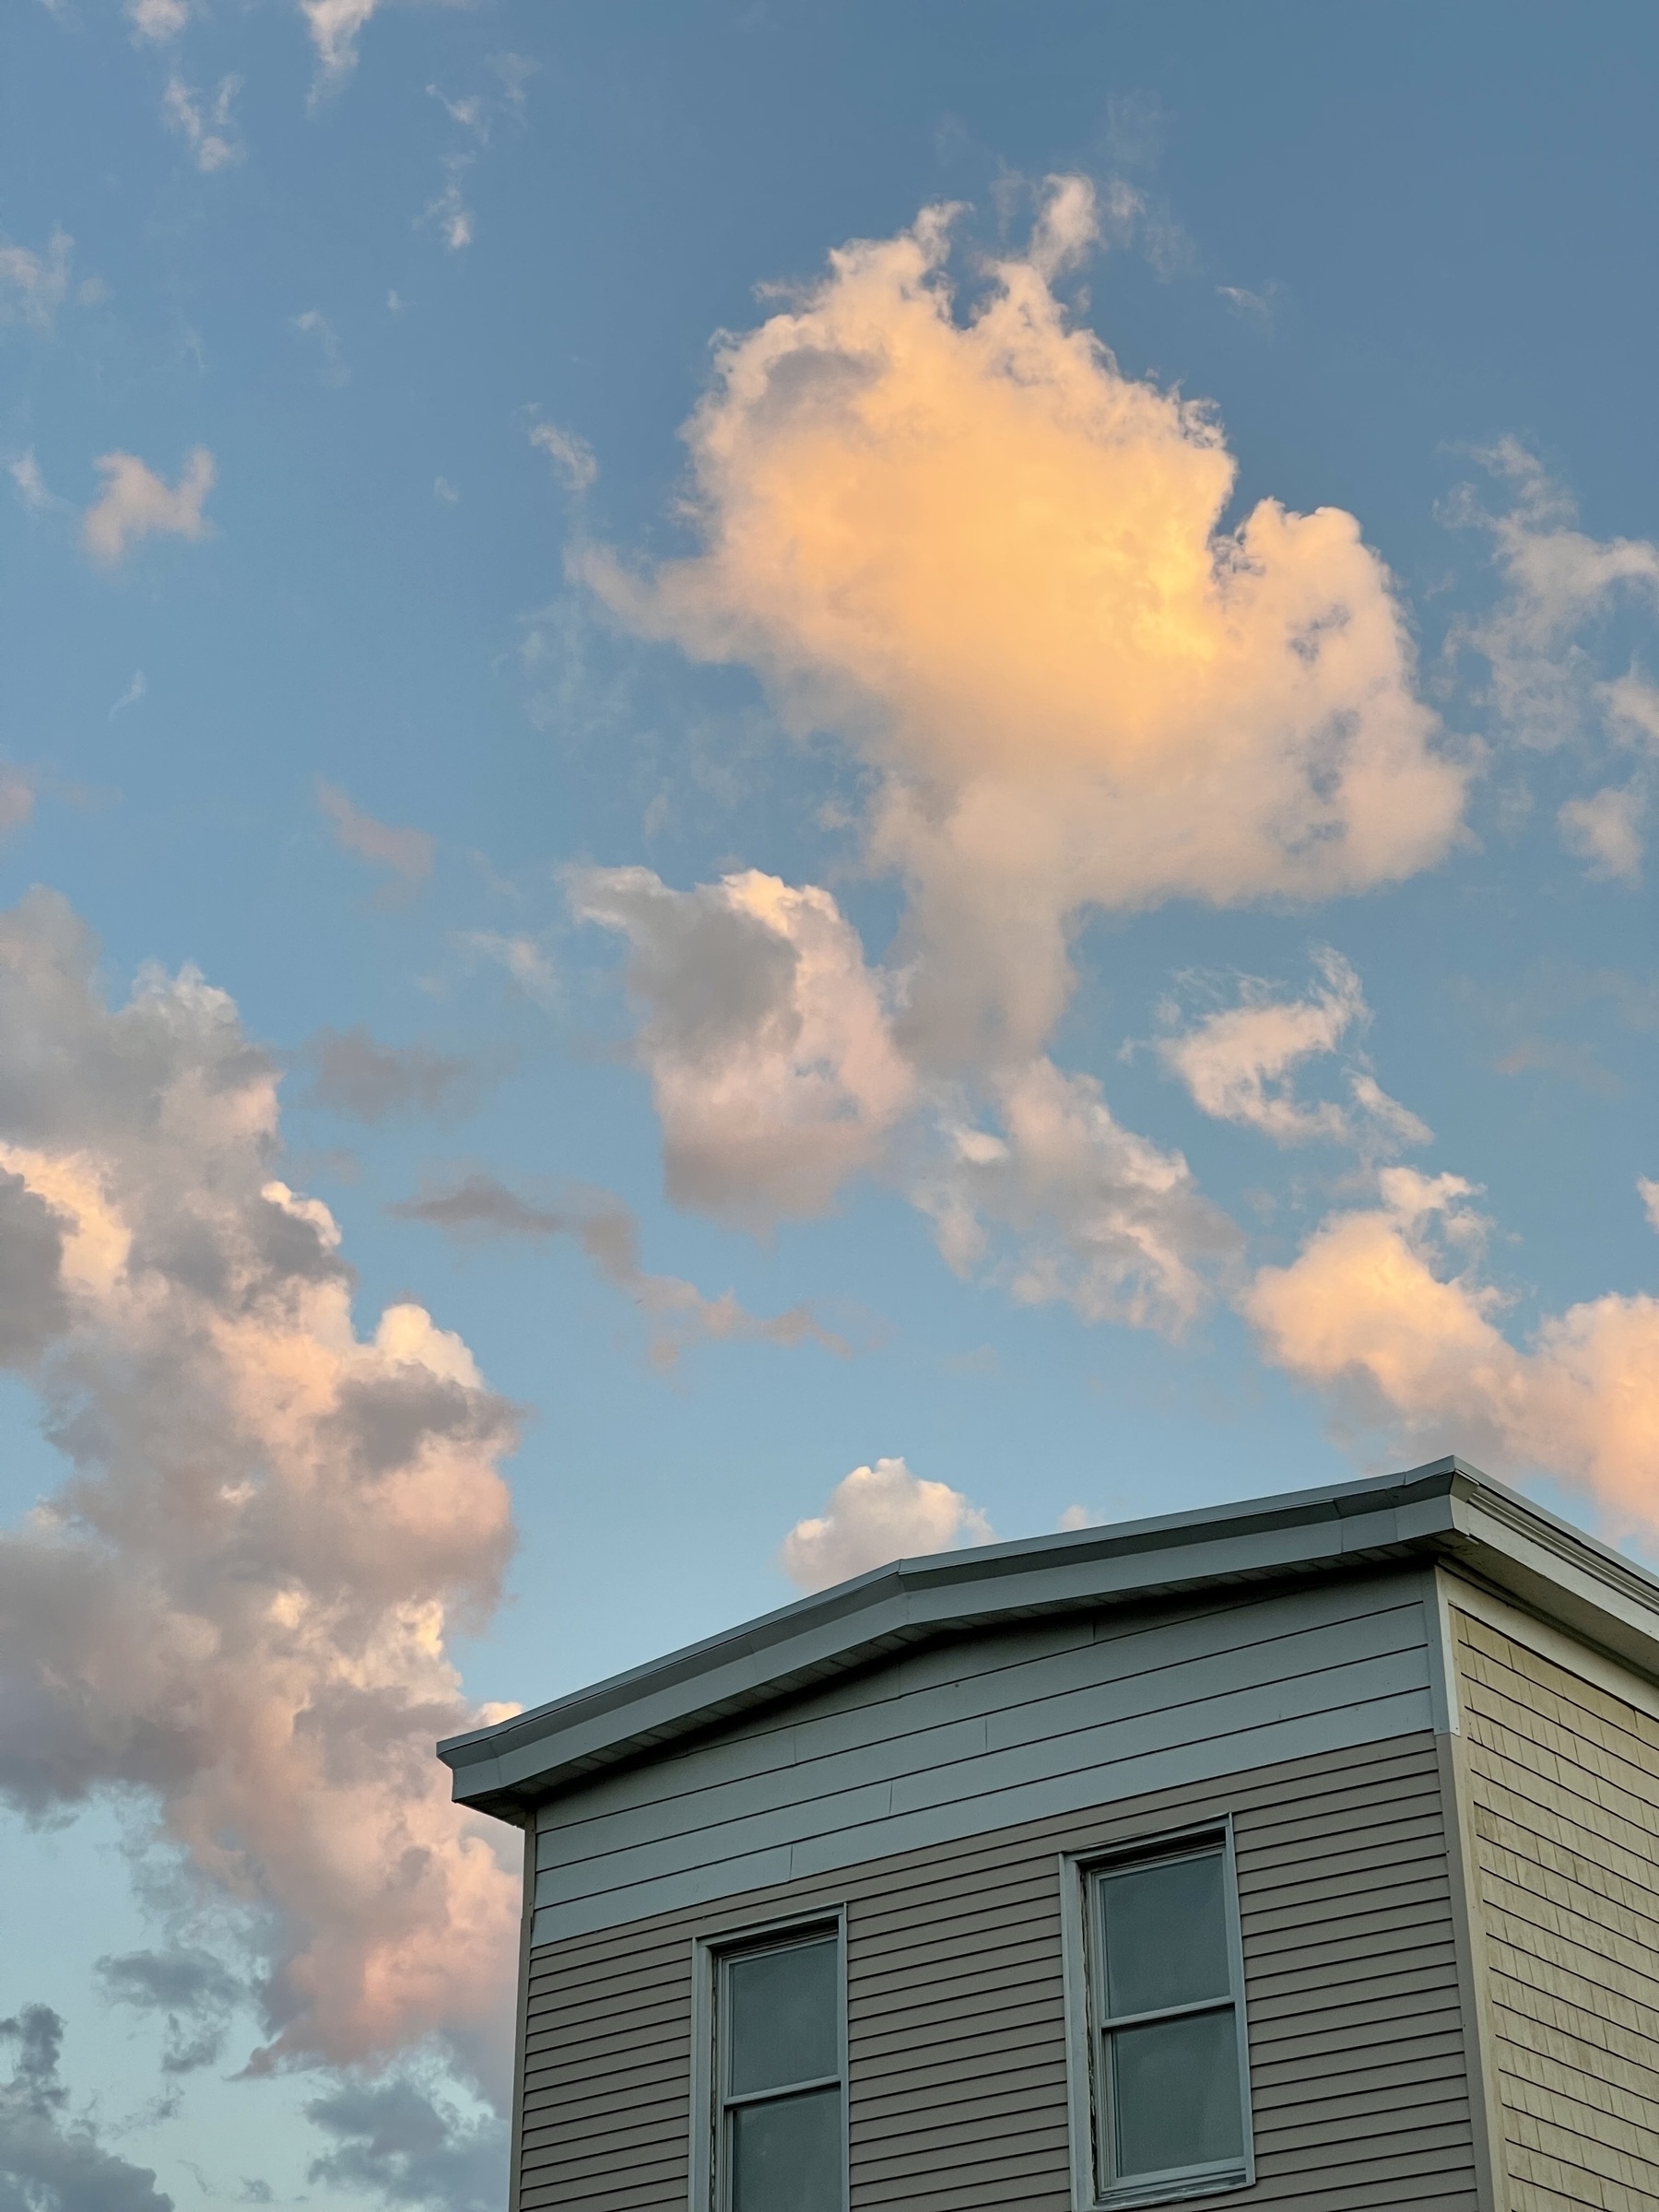 Sunrise clouds above a residential building.